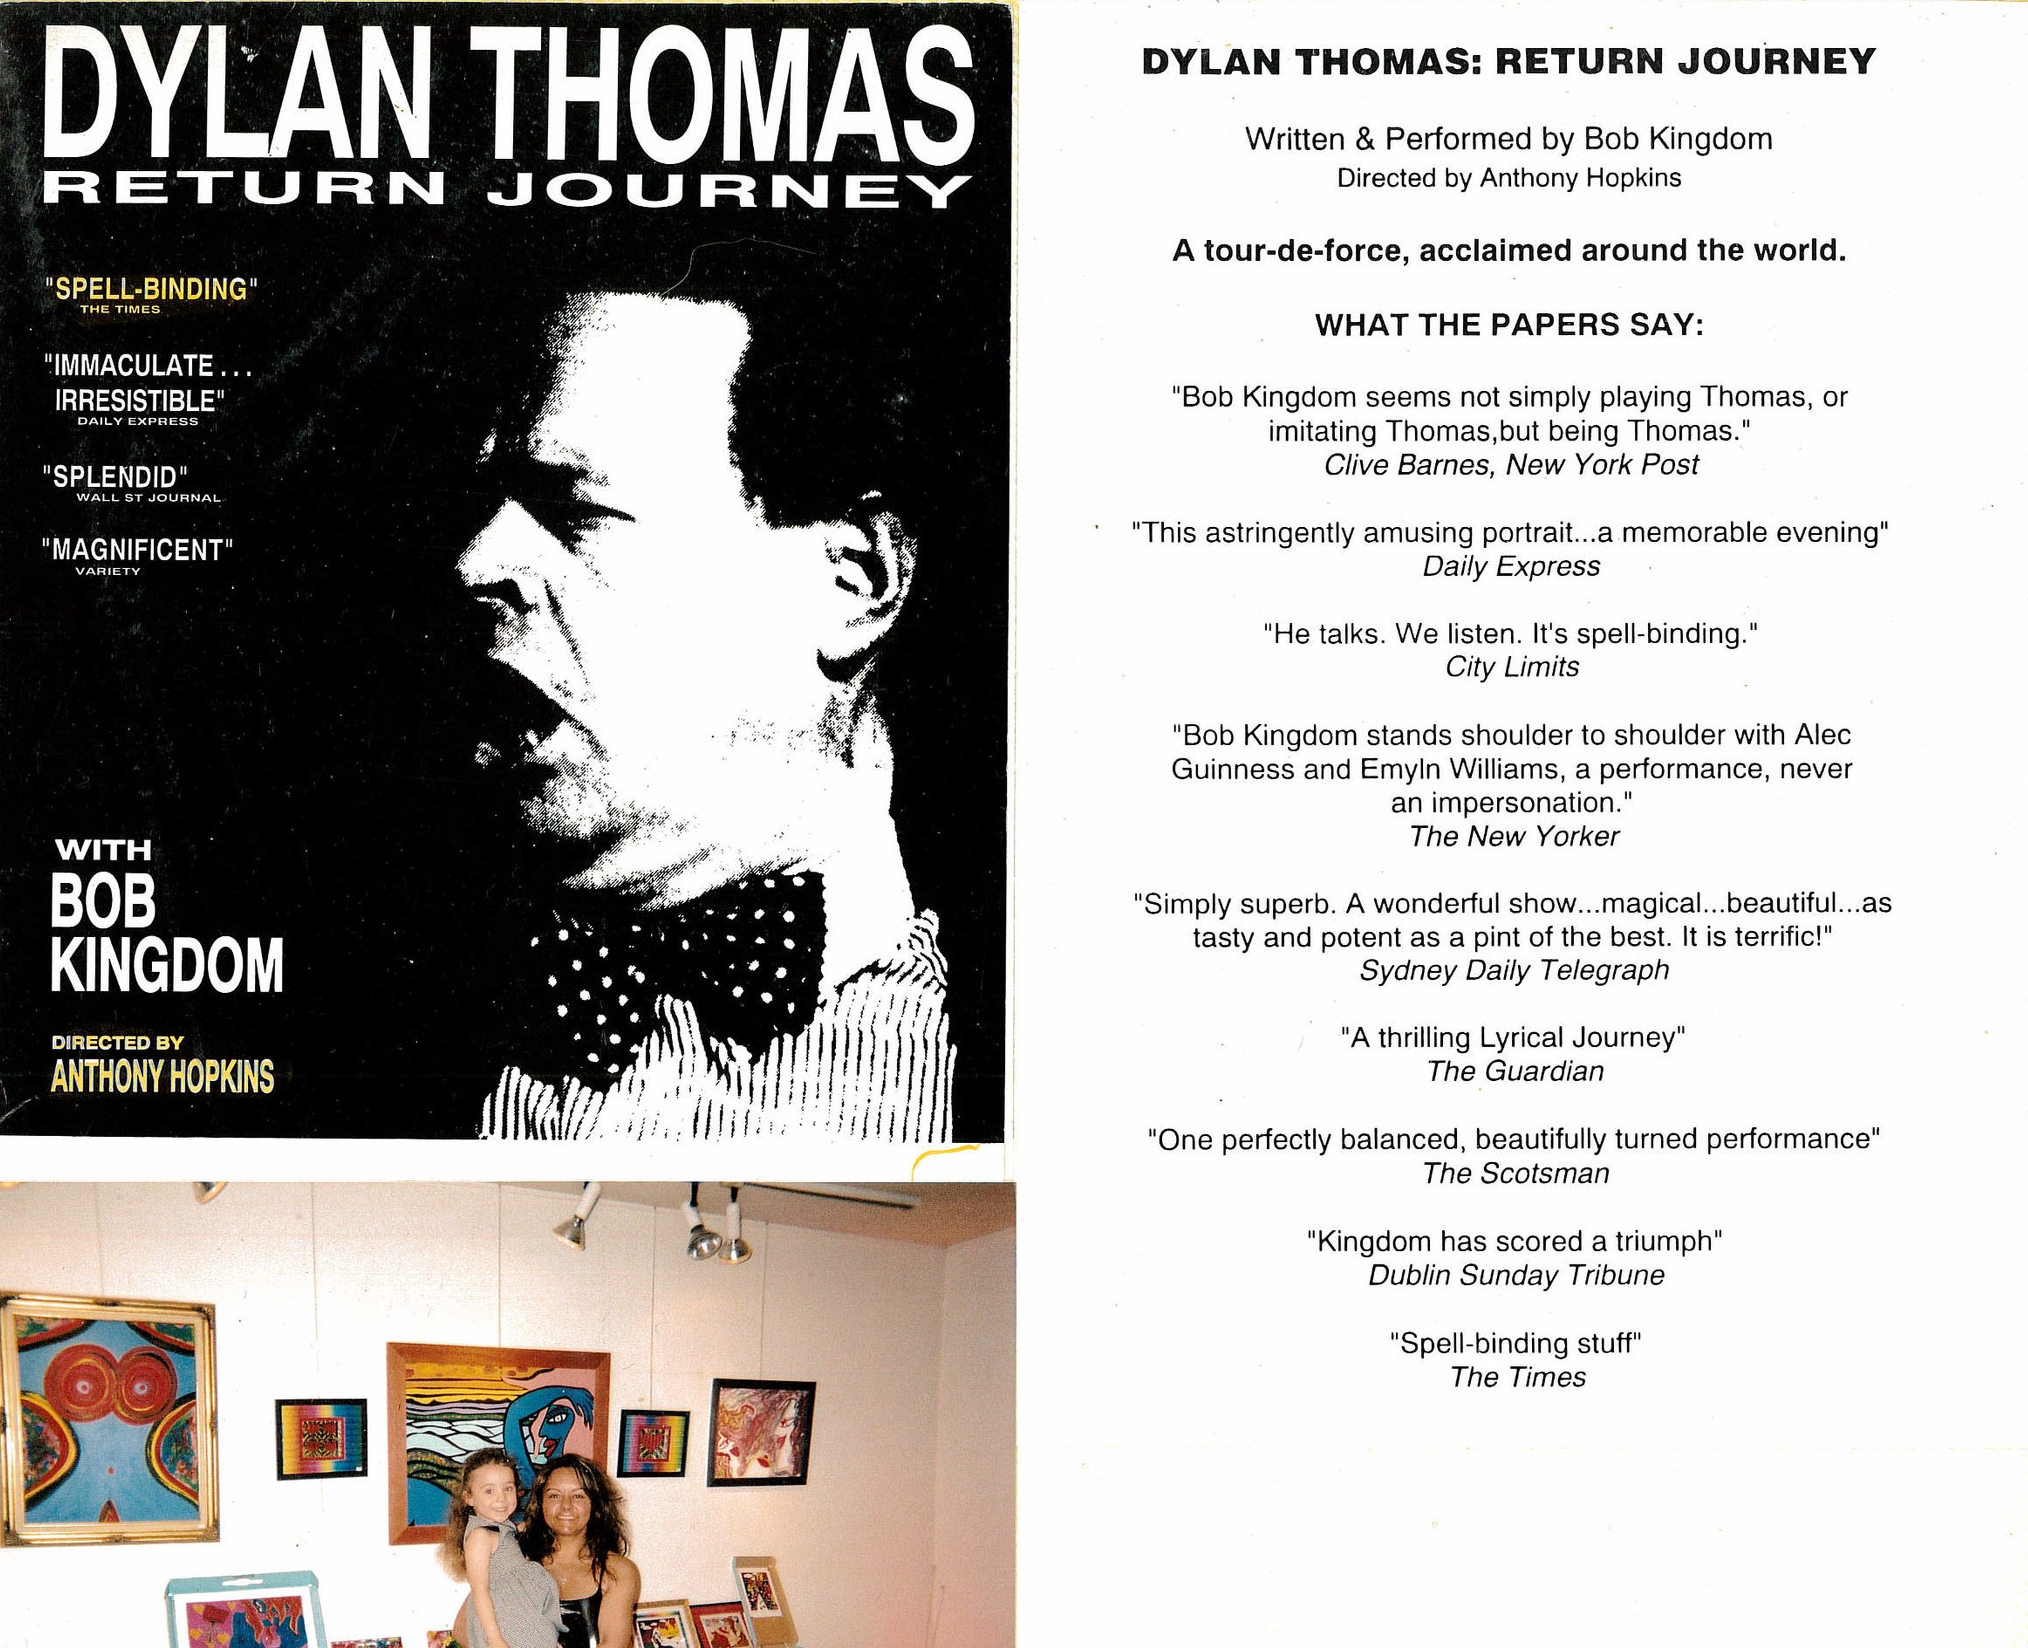 OAP evening with Kim Michelle Broderick photo art exhibition Espace cardin and DYLAN THOMAS flyer.jpg